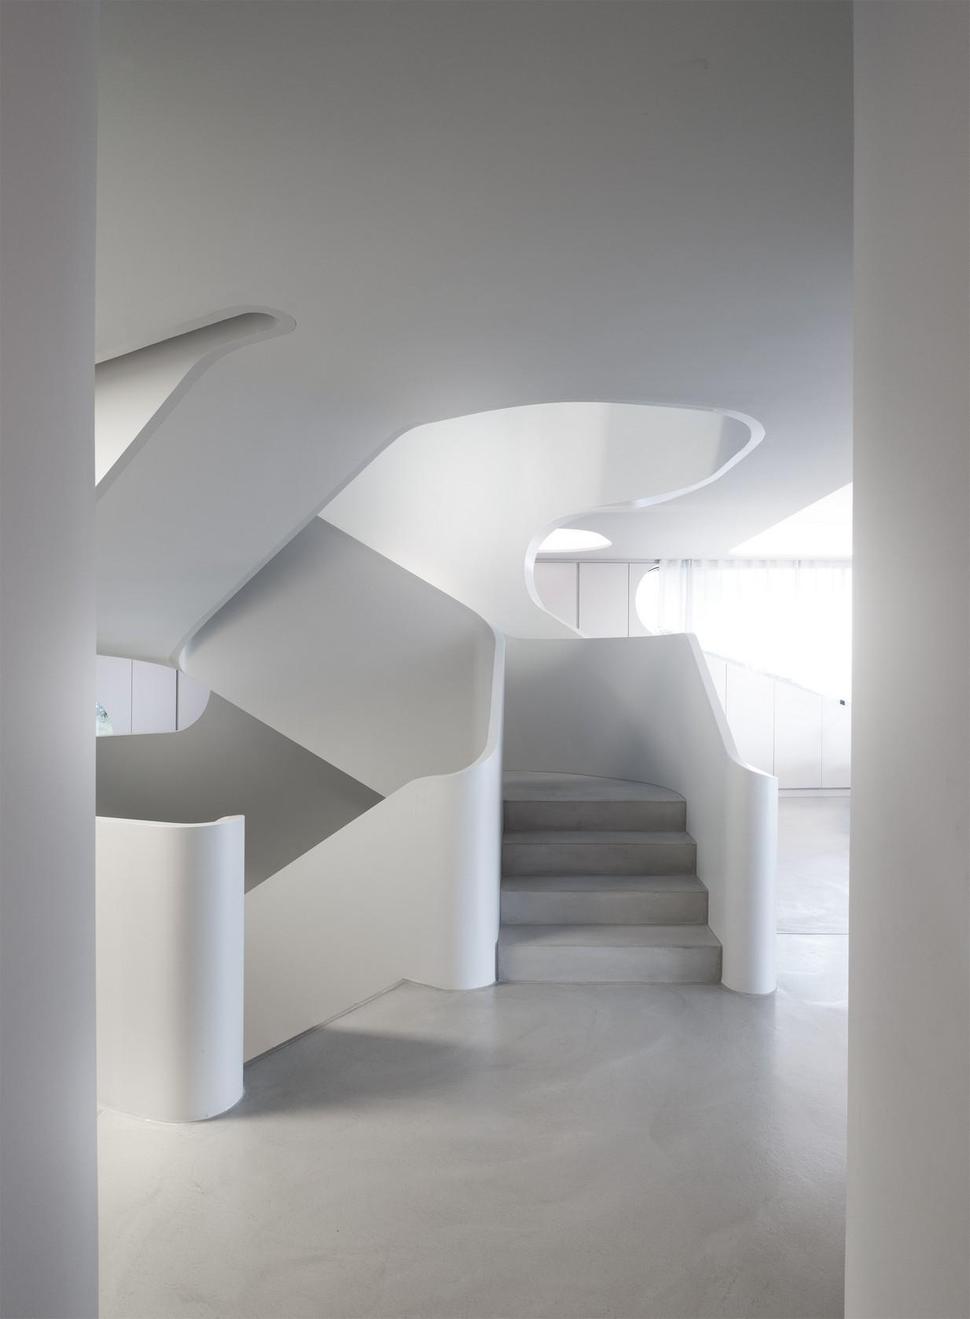 angular-modern-home-features-large-curvaceous-stairwell-inside-7-stairs.jpg